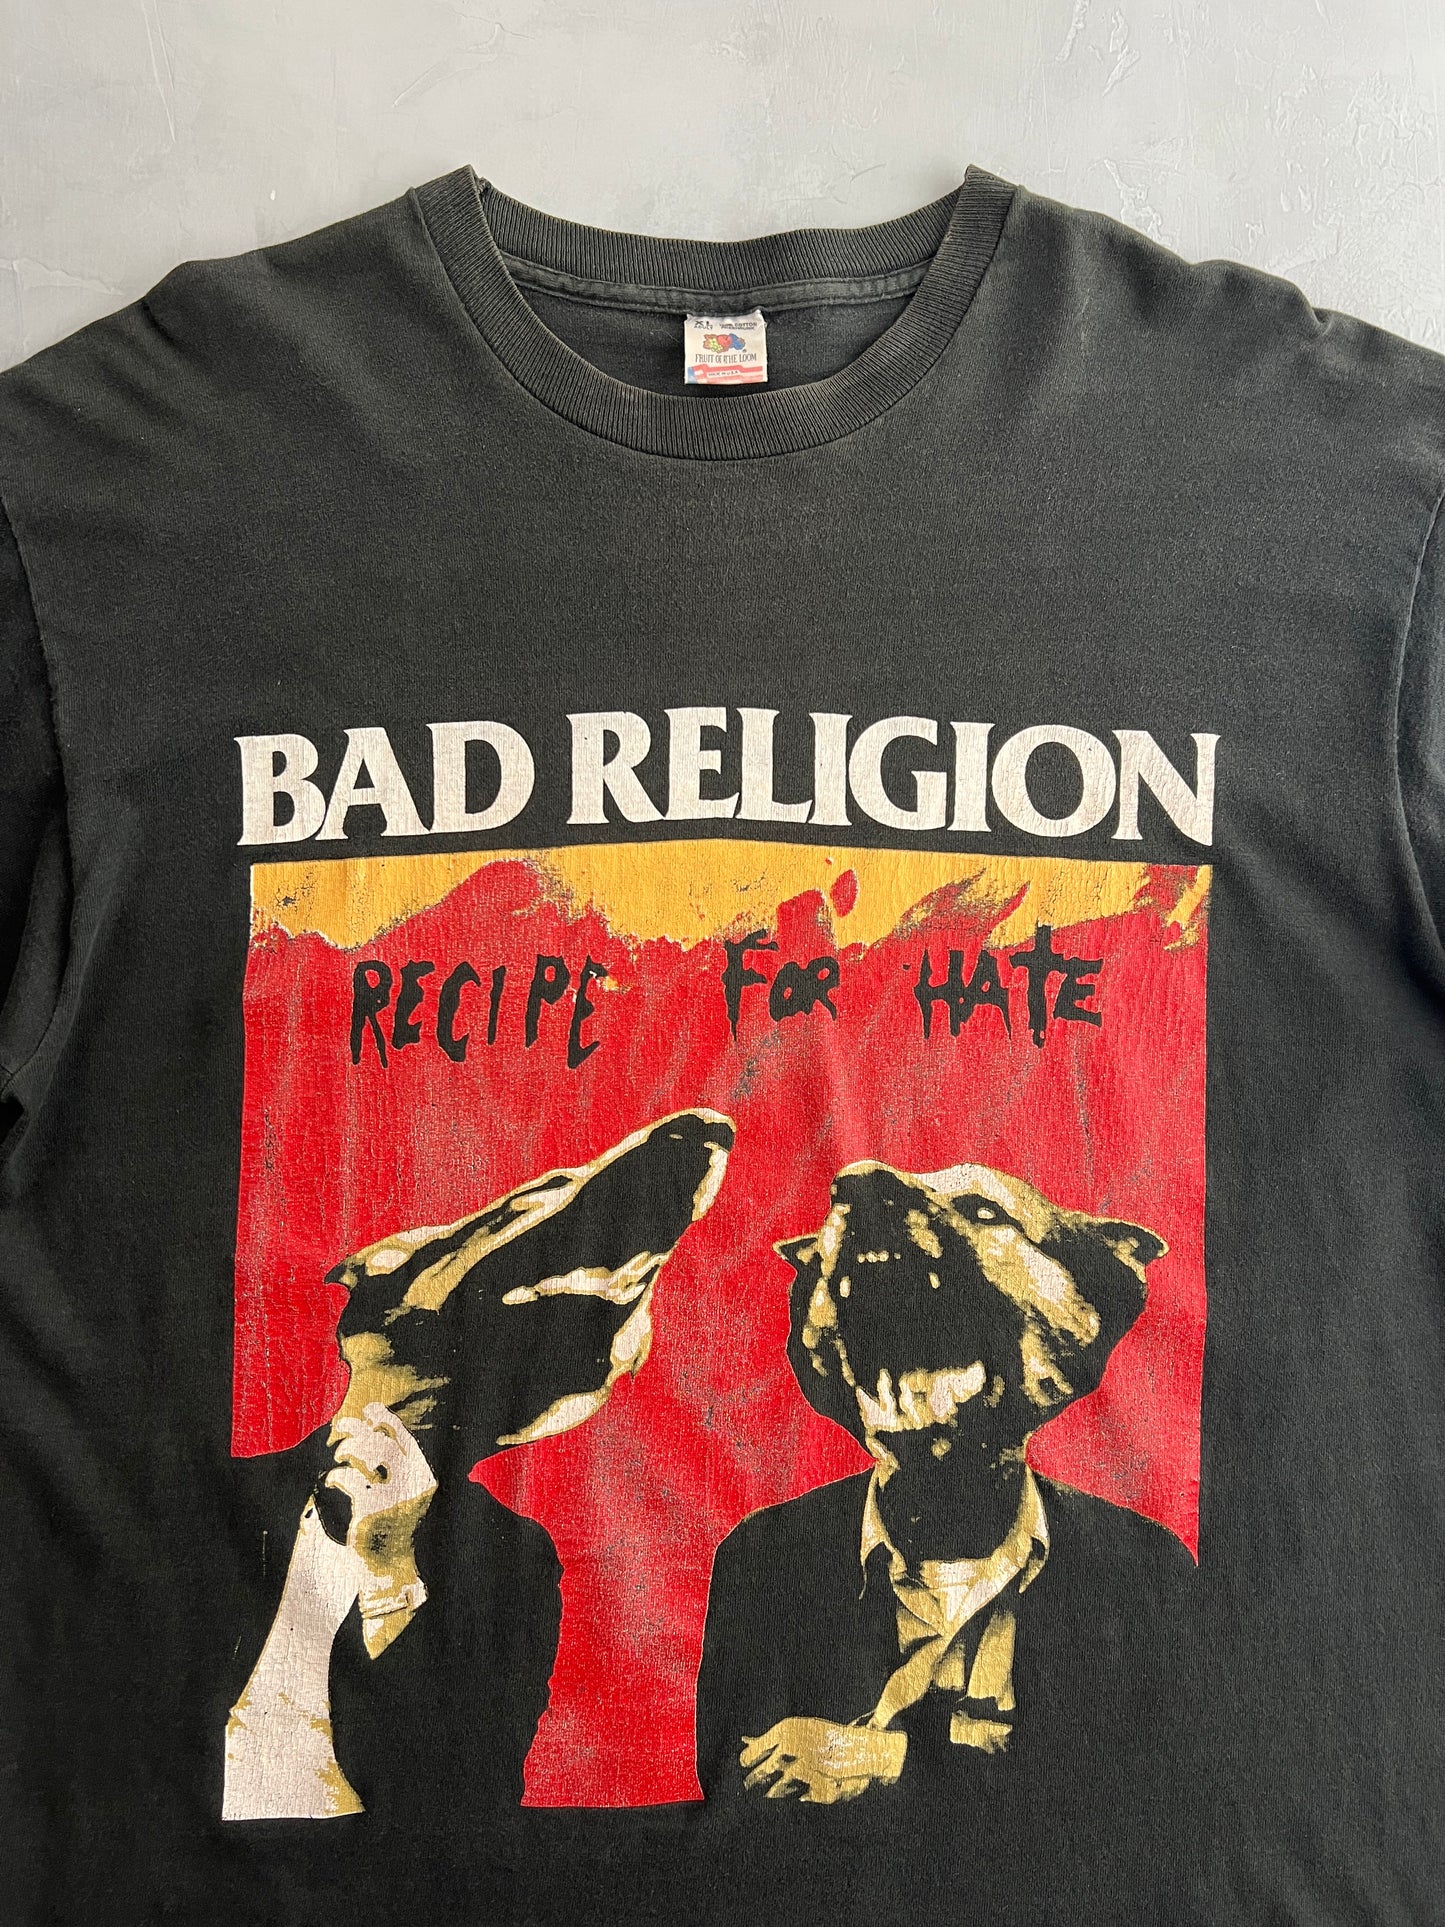 '93 Bad Religion 'Recipe For Hate' Tee [XL]